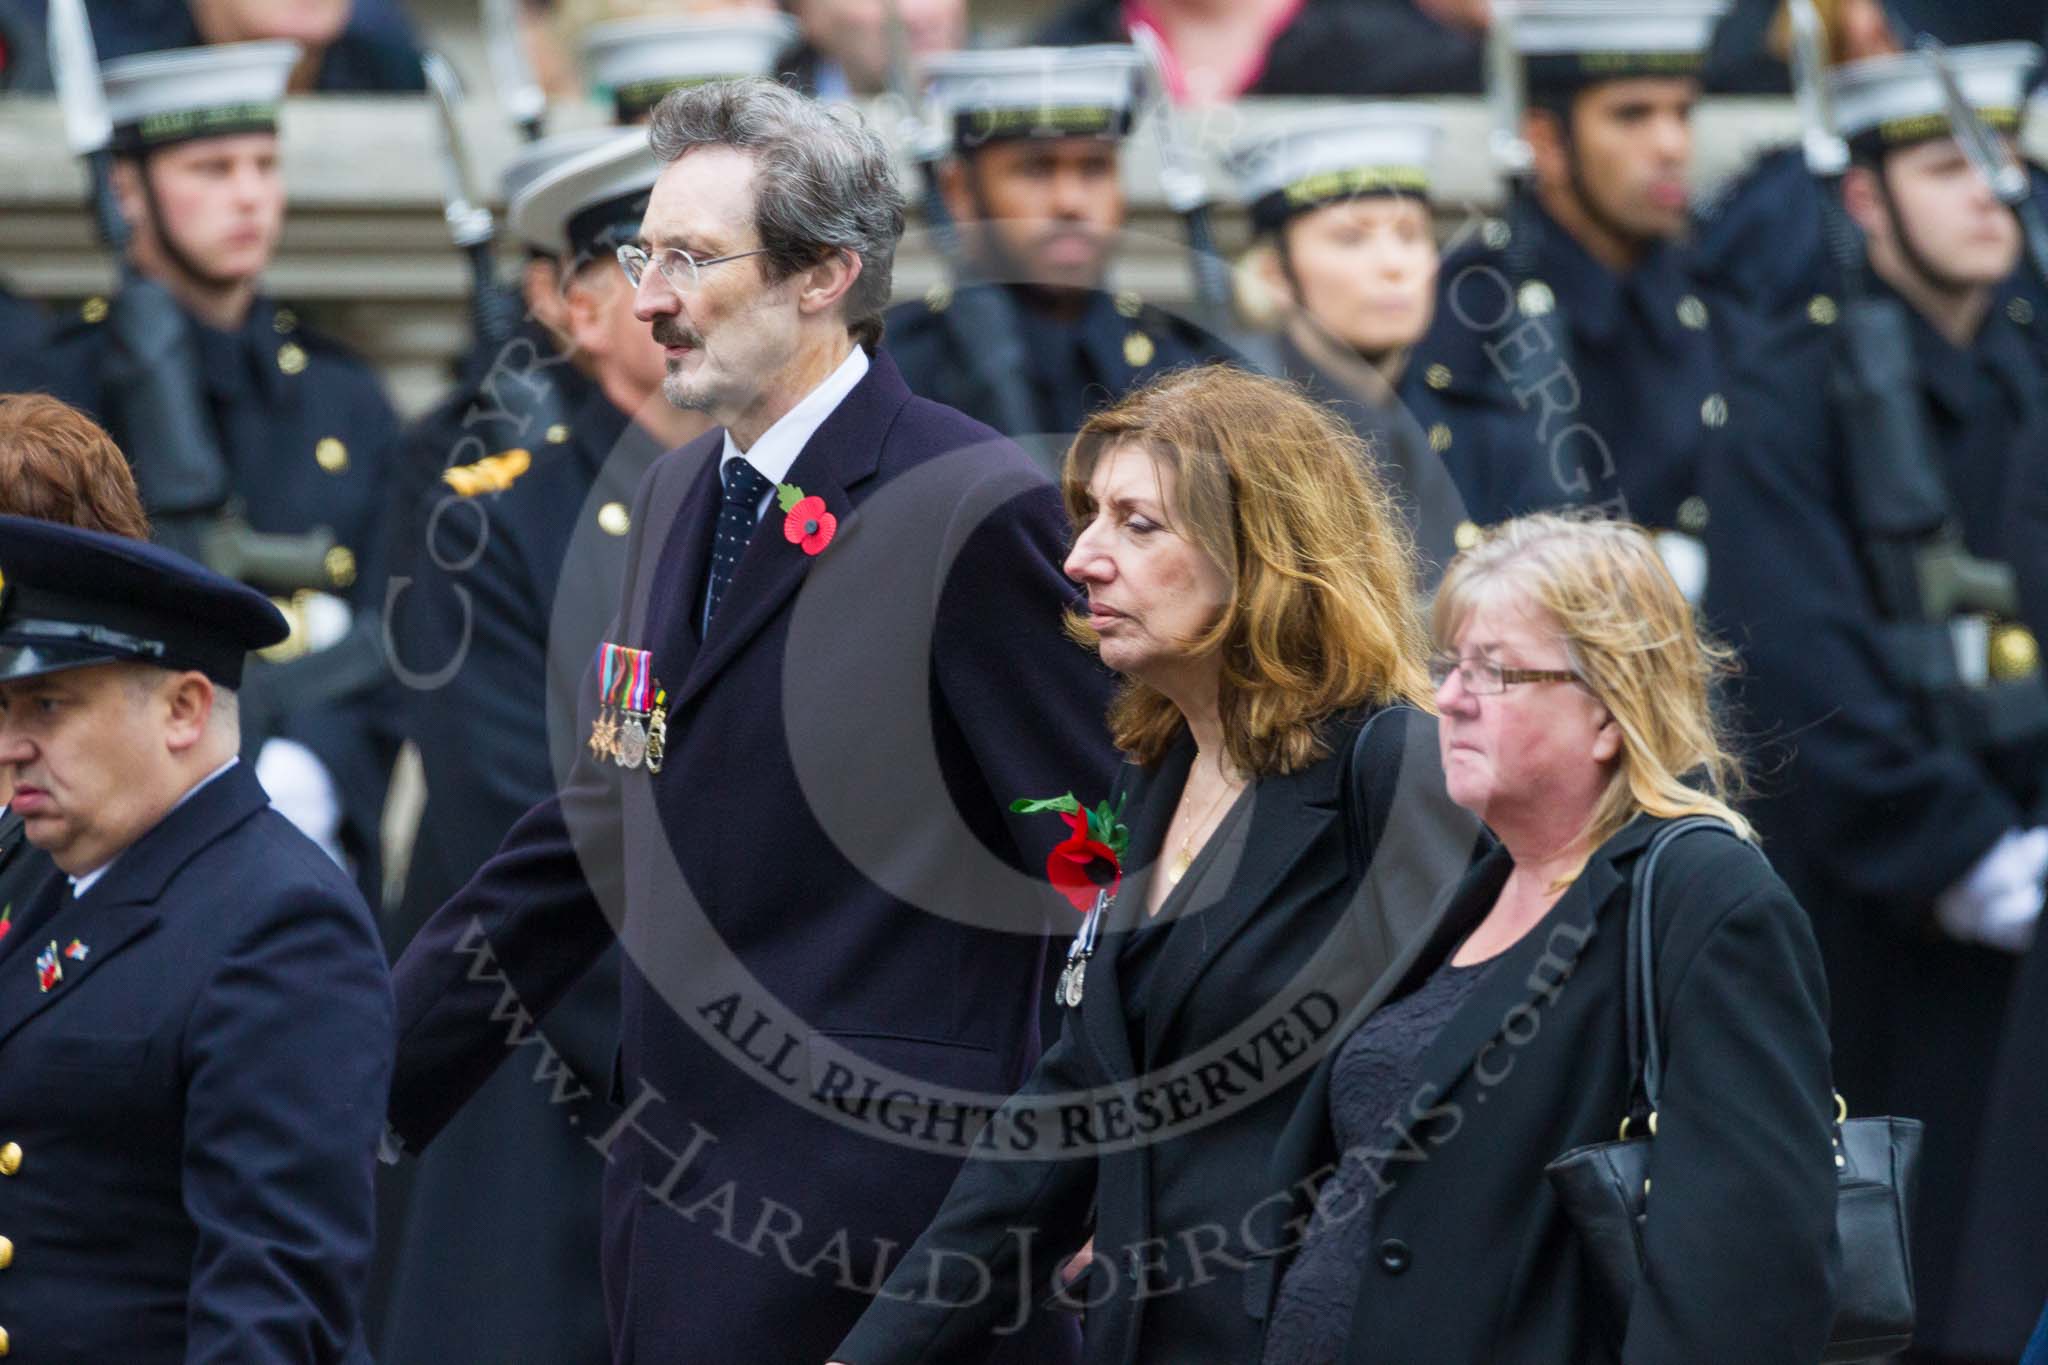 Remembrance Sunday at the Cenotaph 2015: If you know which group is shown here, please email cenotaph@haraldjoergens.com.
Cenotaph, Whitehall, London SW1,
London,
Greater London,
United Kingdom,
on 08 November 2015 at 12:21, image #1761